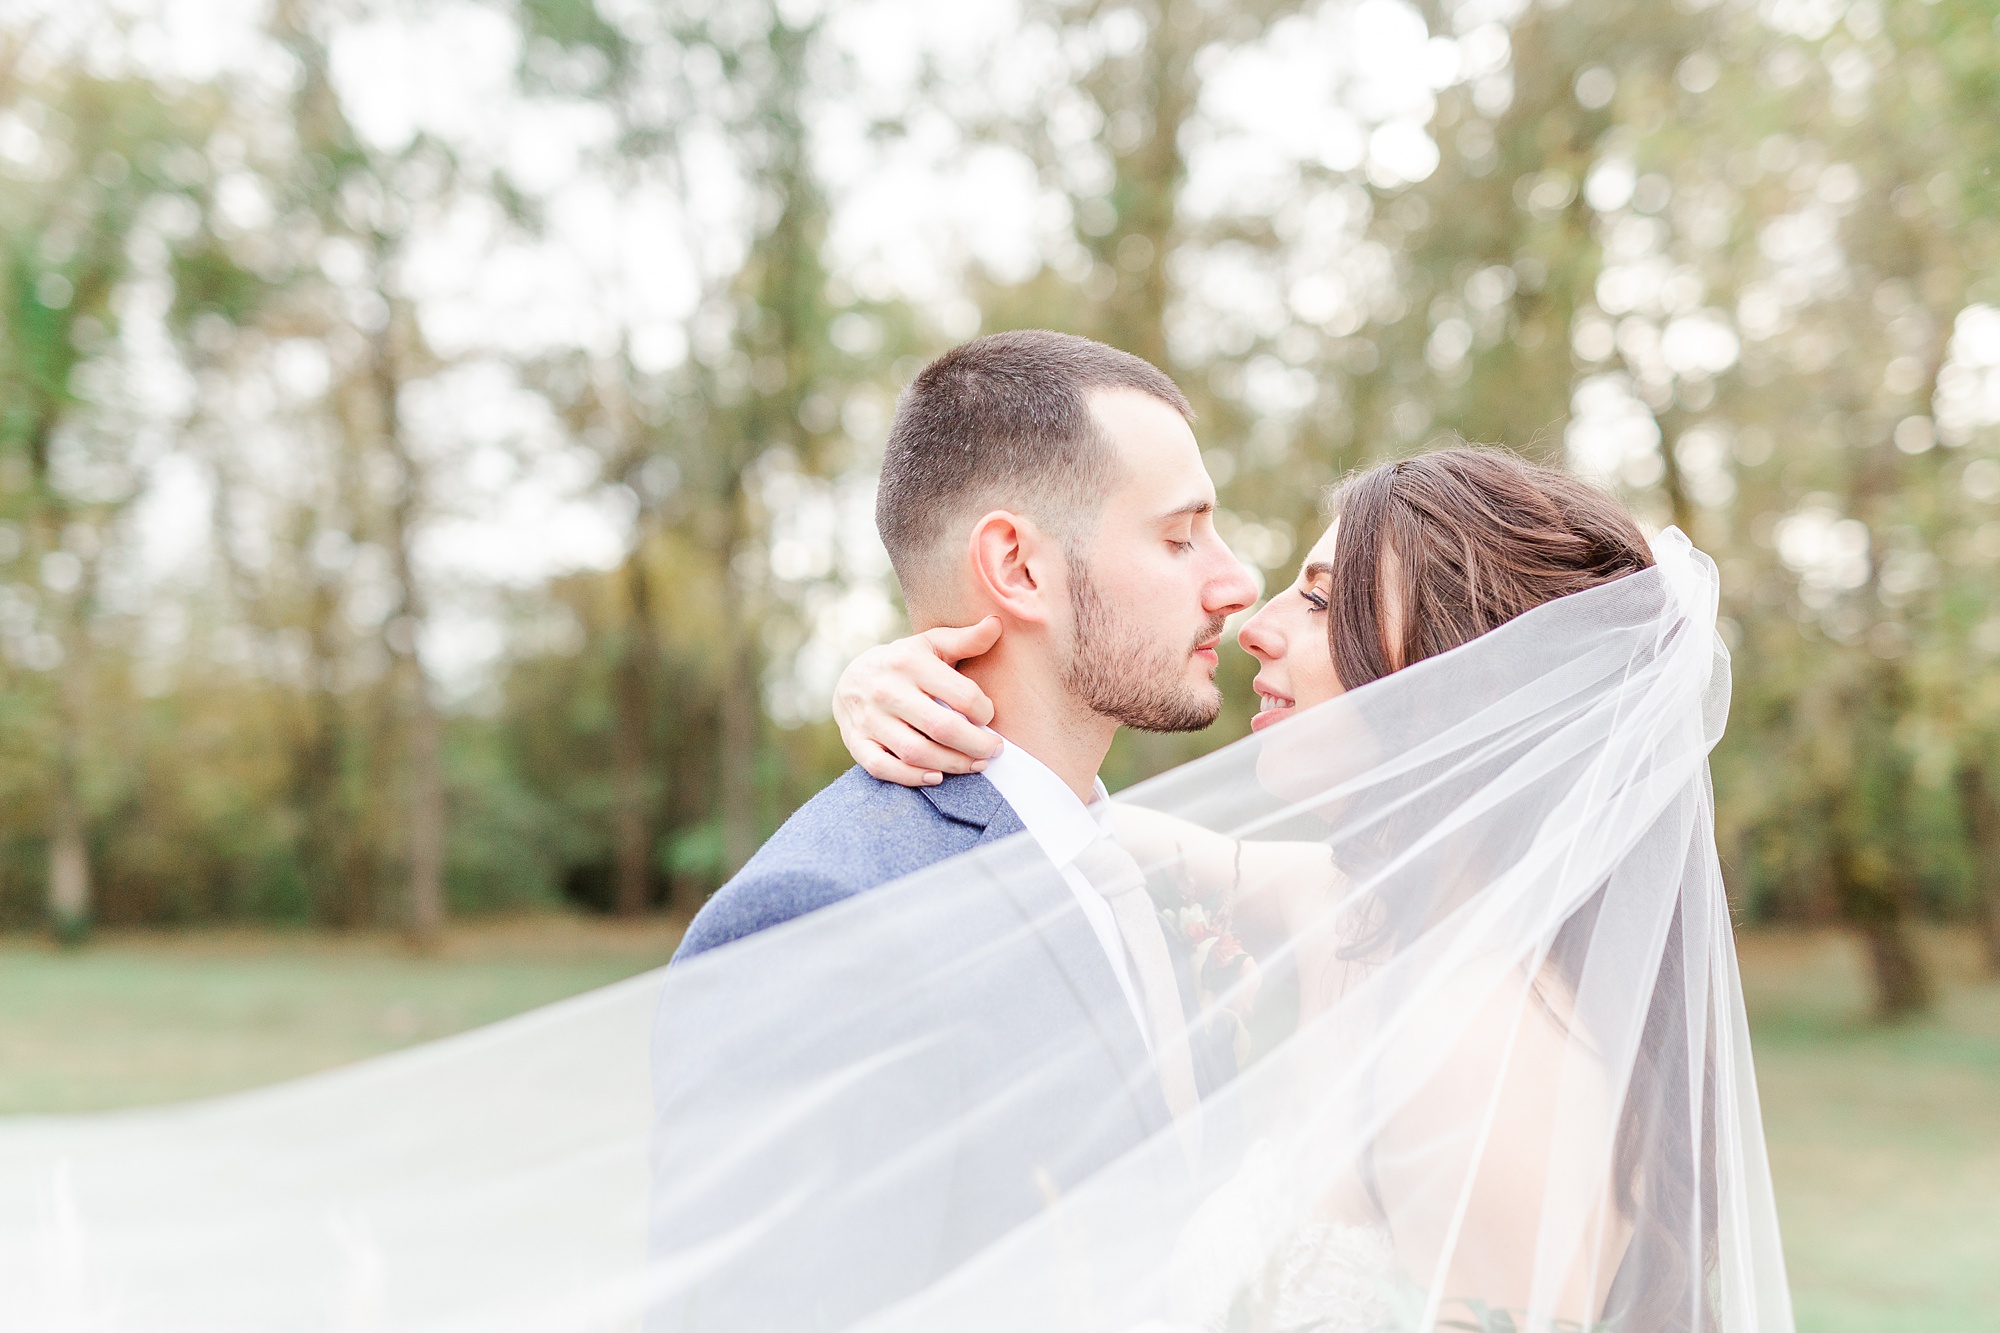 bride and groom kiss while veil wraps around them